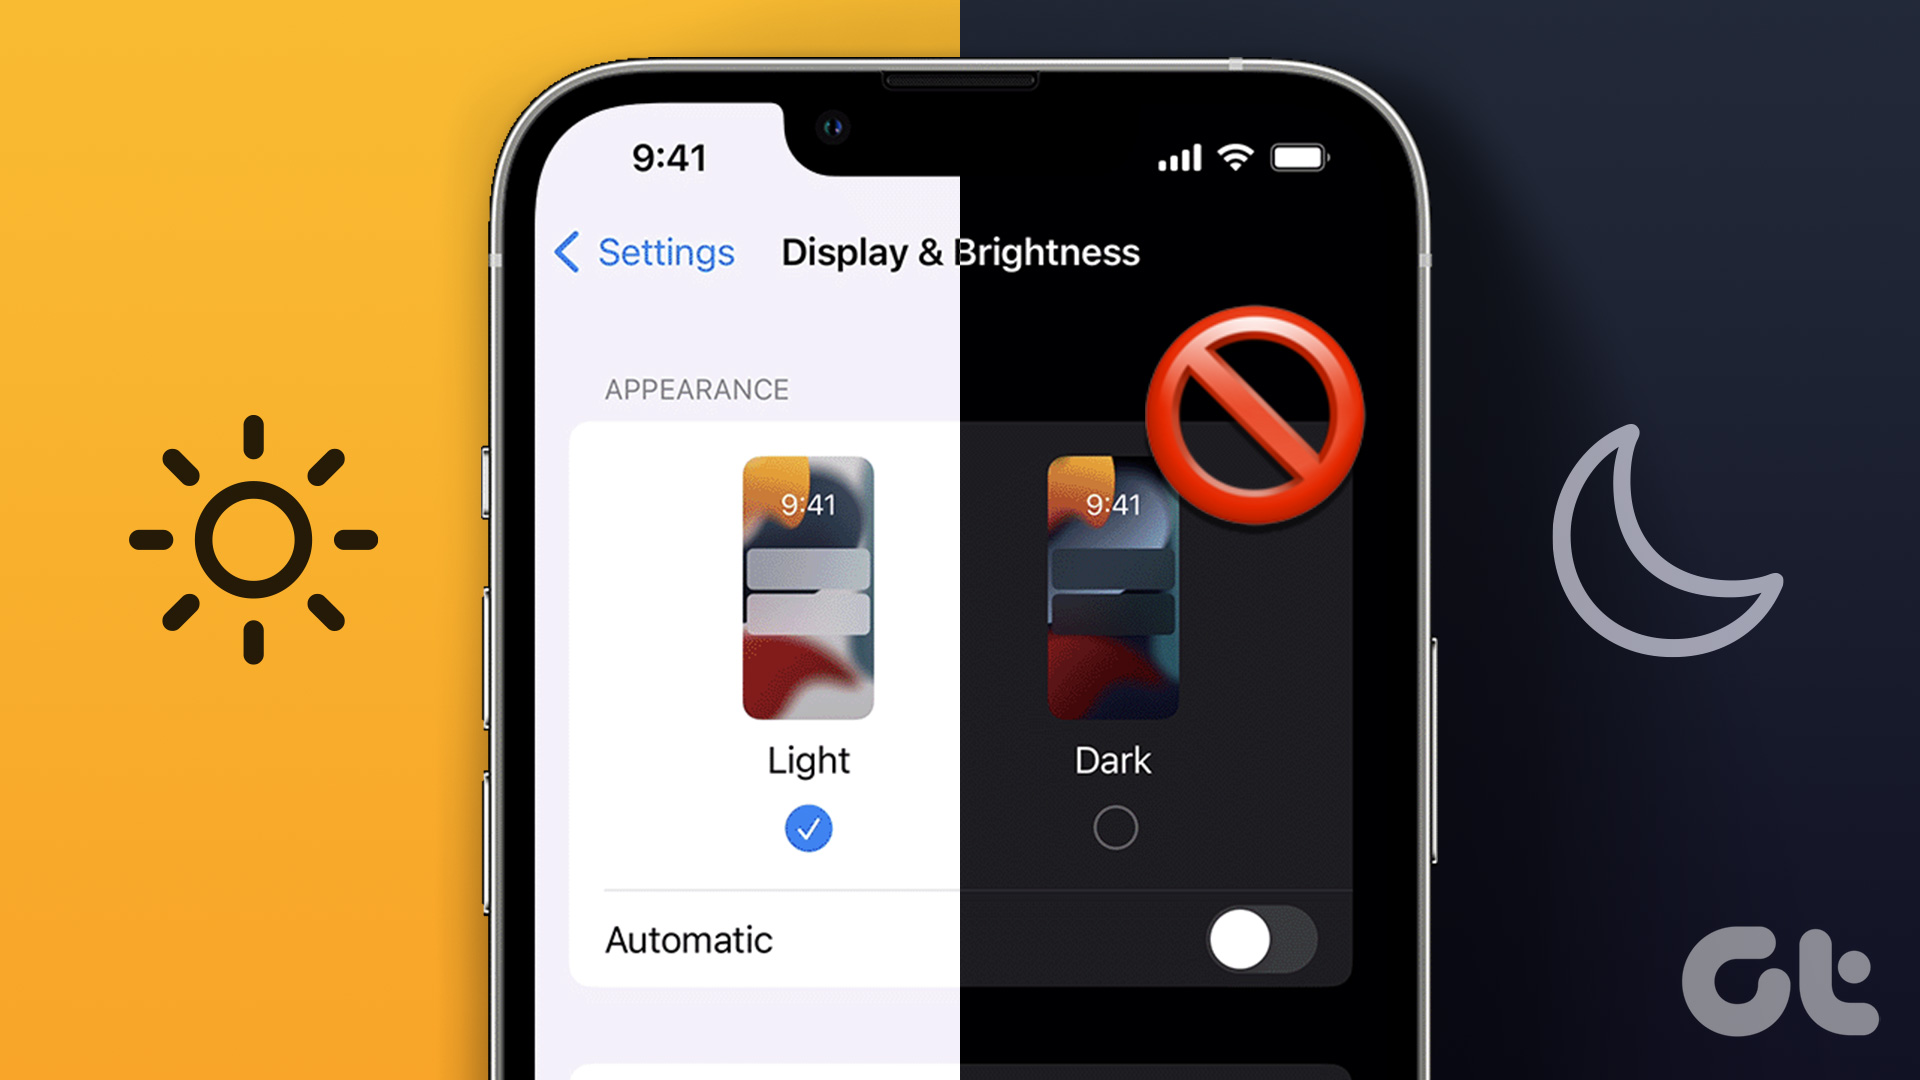 Make Your iPhone Switch Wallpapers Automatically When Dark Mode or Light  Mode Is Enabled « iOS & iPhone :: Gadget Hacks